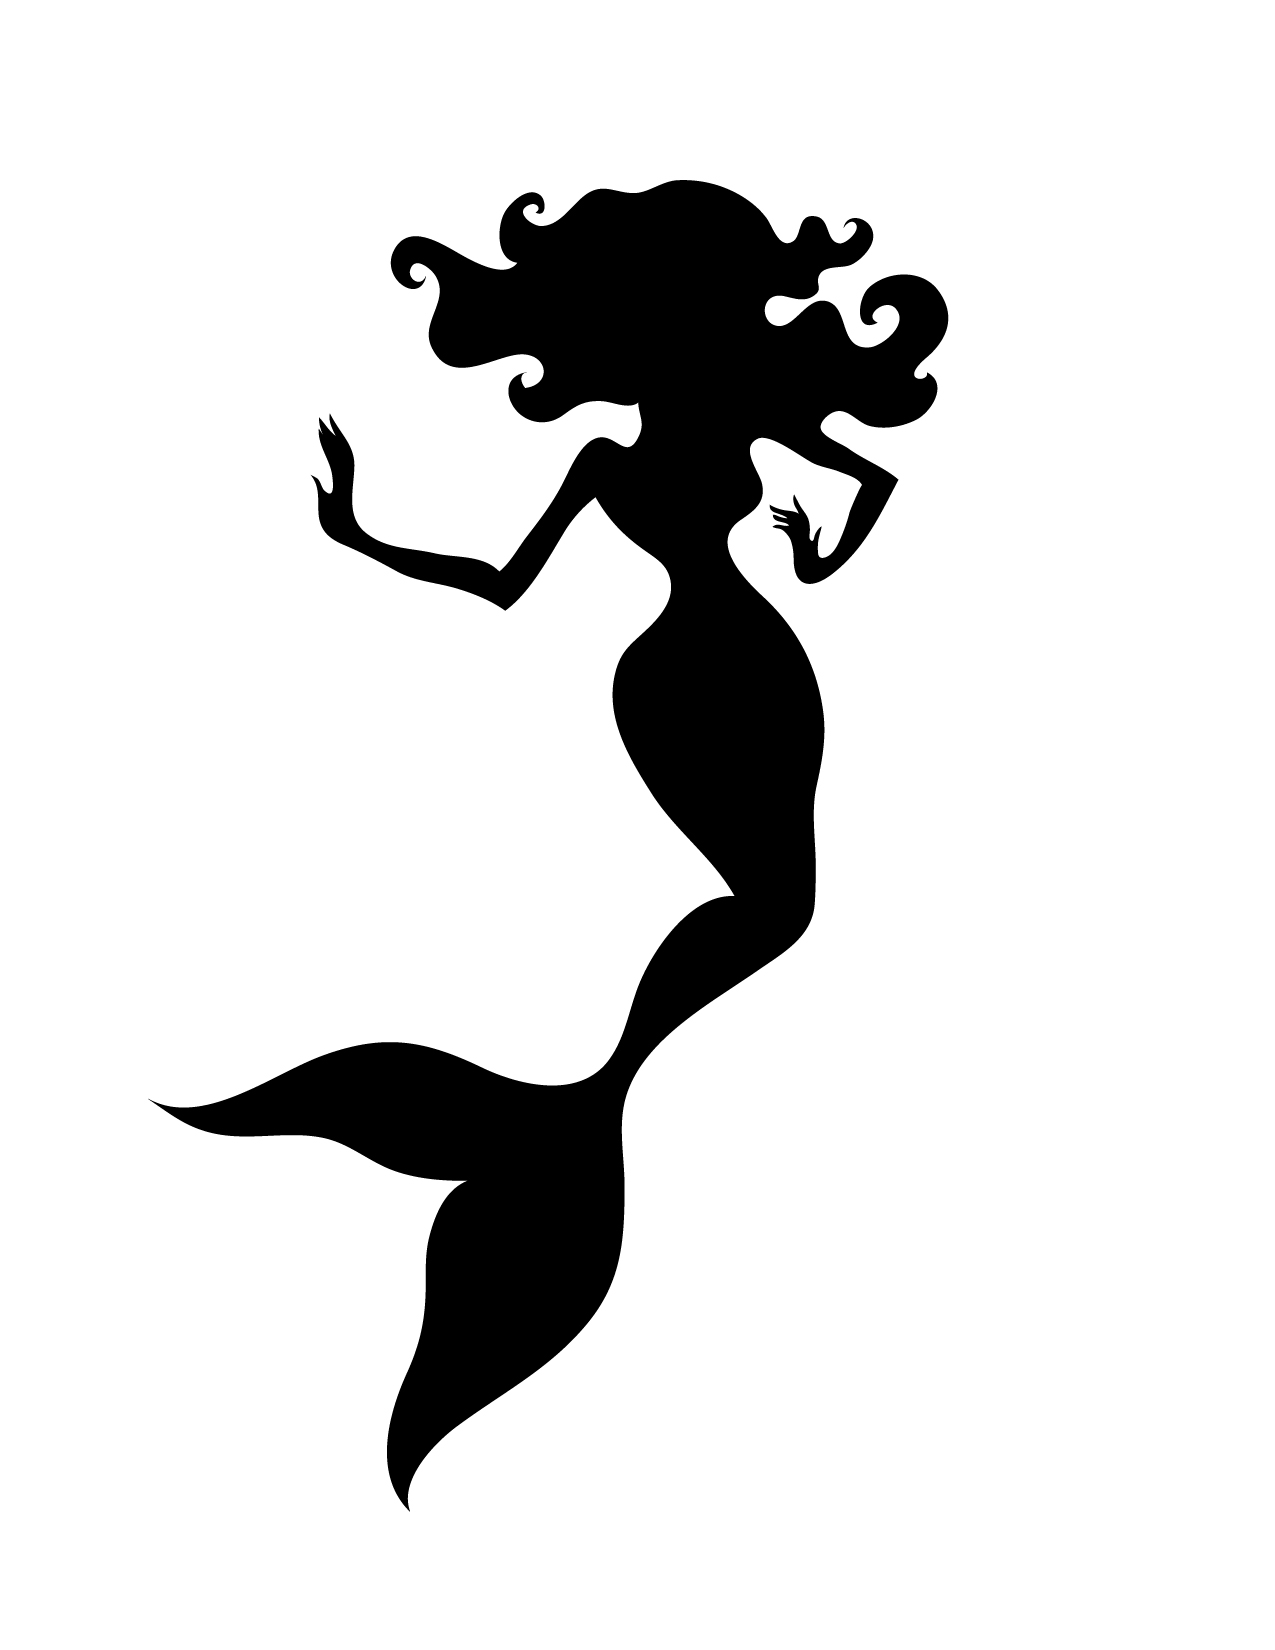 Mermaid tail silhouette black and white clipart 